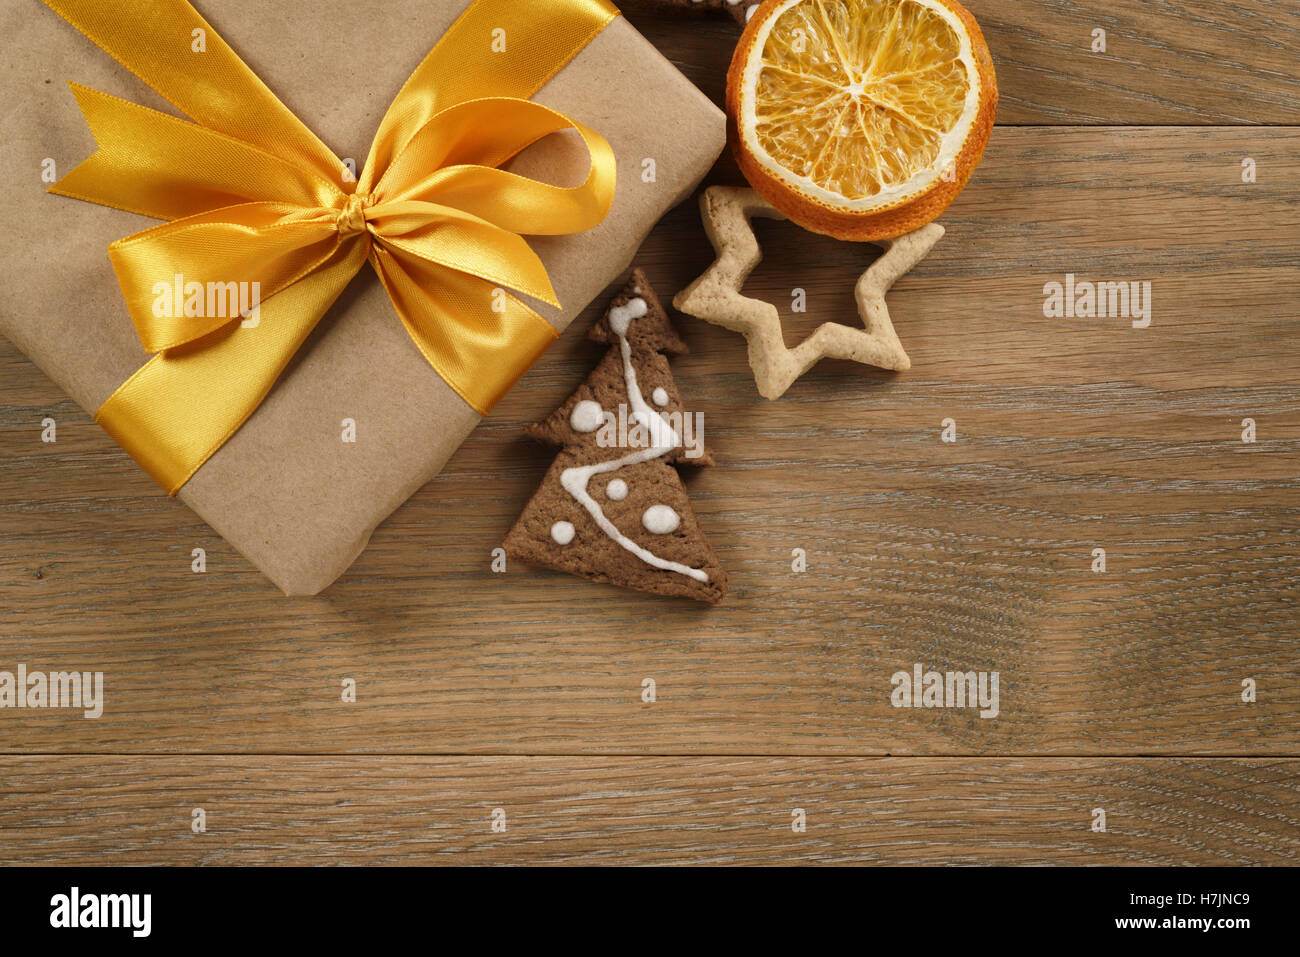 gift box with golden ribbon bow and christmas cookies on wood table Stock Photo